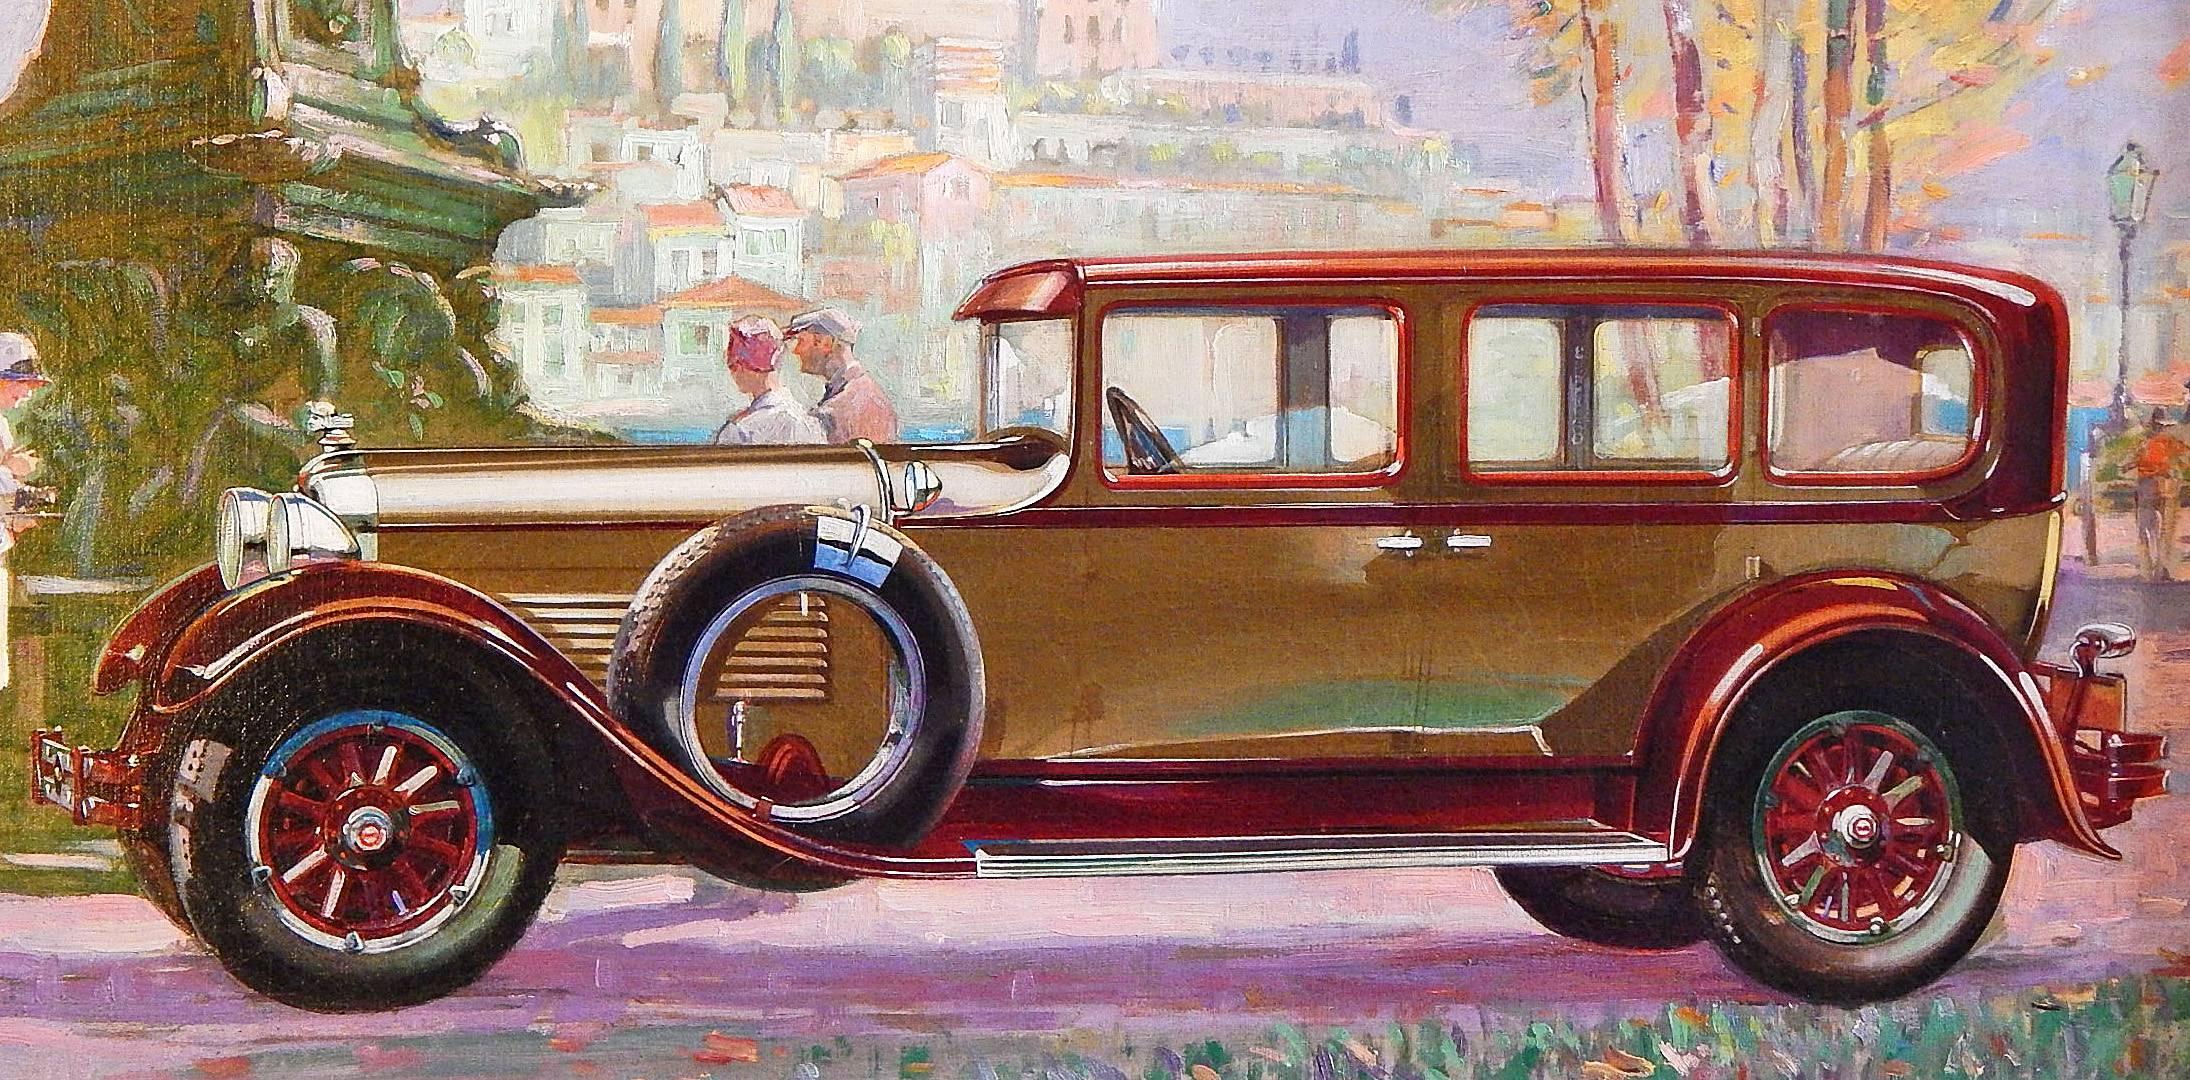 Masterfully painted and full of light and color, this oil painting depicting a 1928 Packard automobile, the height of Art Deco style and elegance toward the end of the Depression, is set on the edge of a park with a monumental bronze sculpture